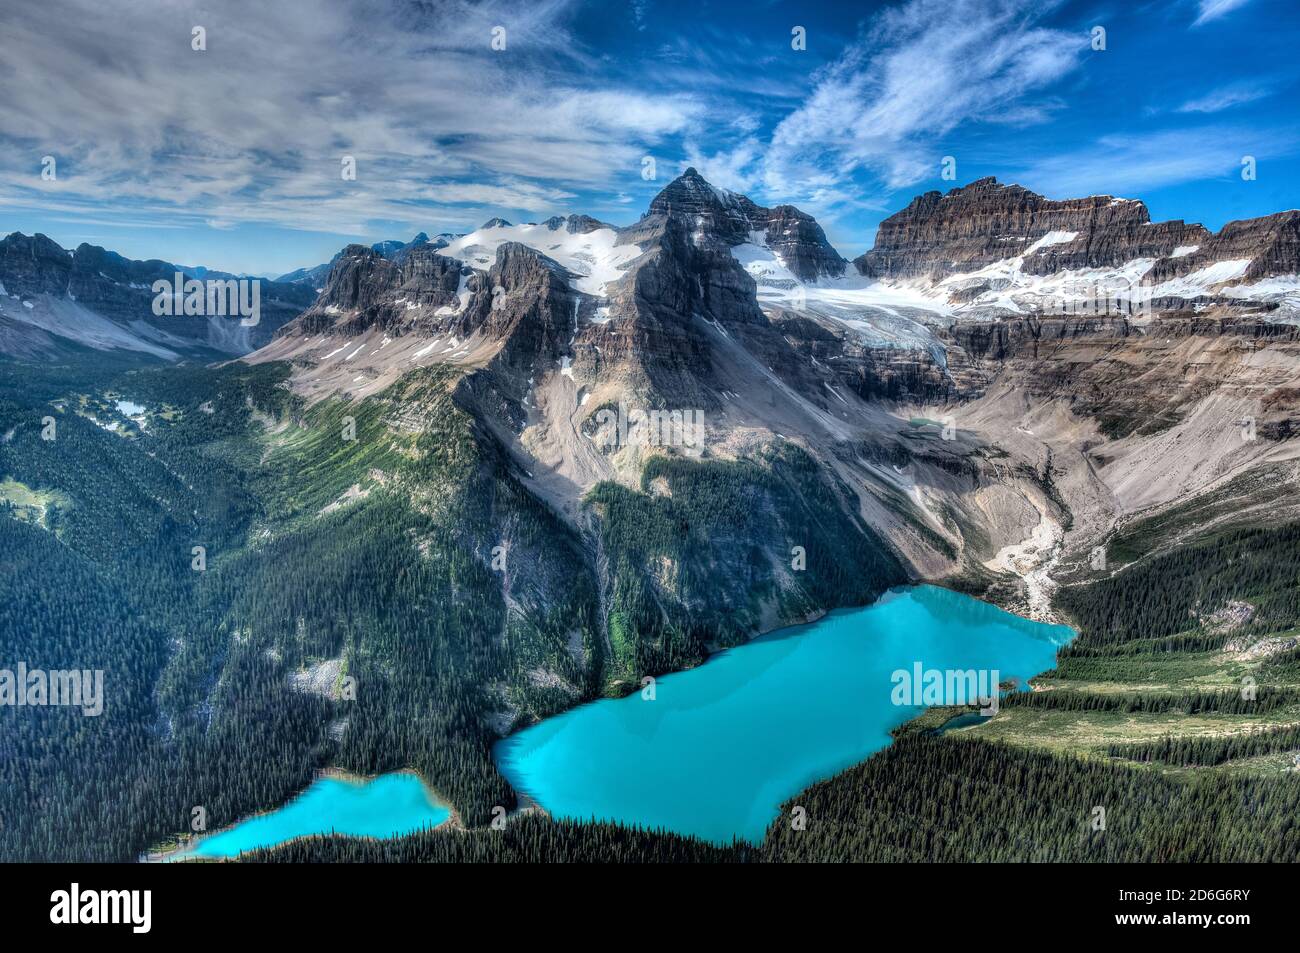 Mount Assiniboine with Marvel Lake taken from a helicopter. Stock Photo